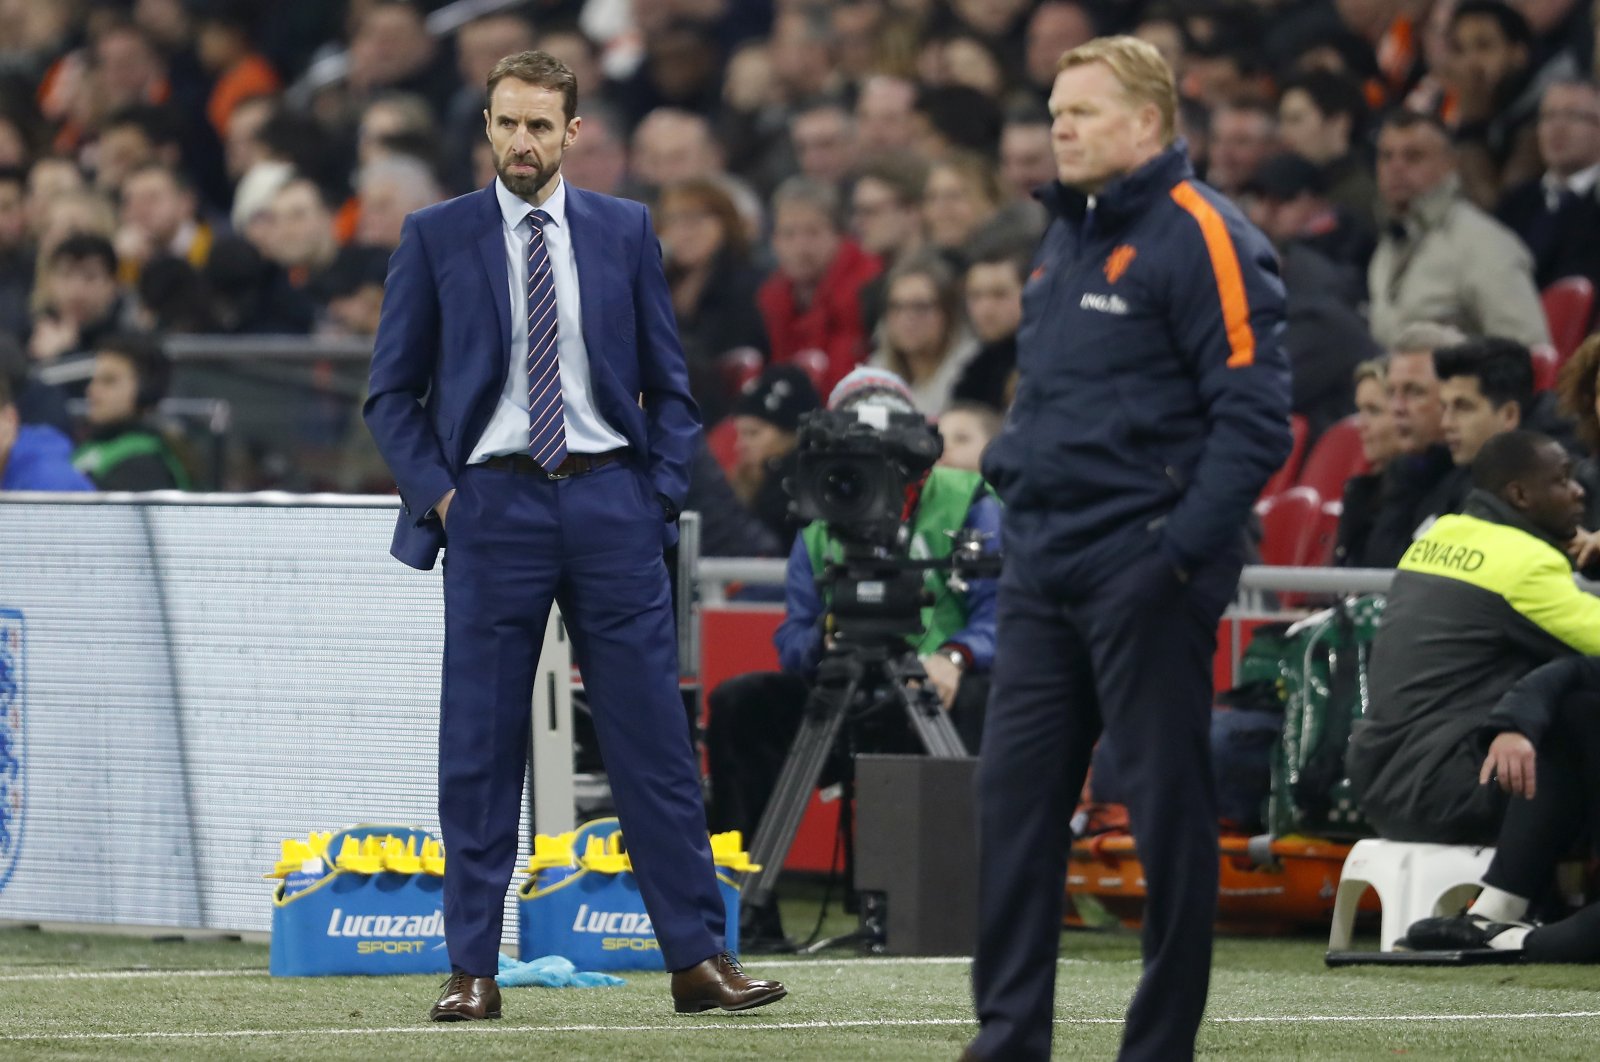 England&#039;s Gareth Southgate and the Netherlands&#039; Ronald Koeman during the International friendly match at the Amsterdam Arena, Amsterdam, The Netherlands, March 23, 2018. (Getty Images Photo)